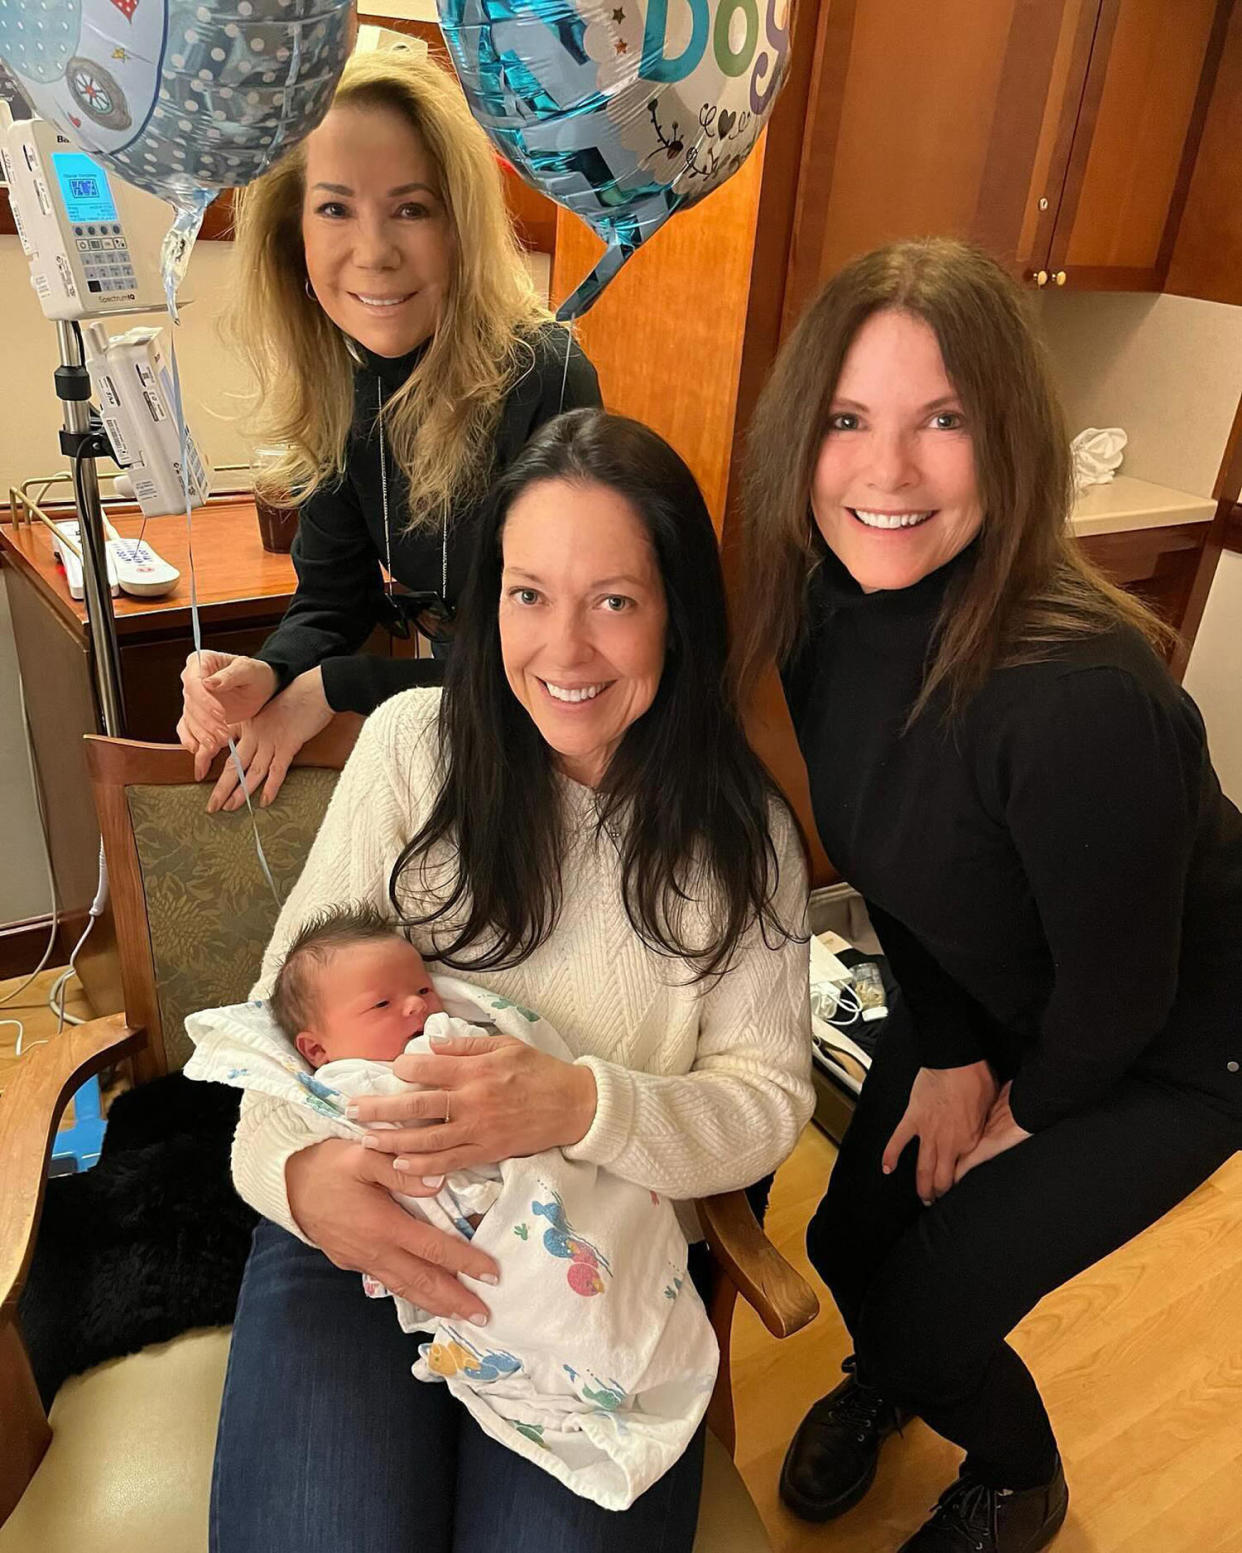 Kathie Lee with baby Ford at the hospital. (@kathielgifford via Instagram)